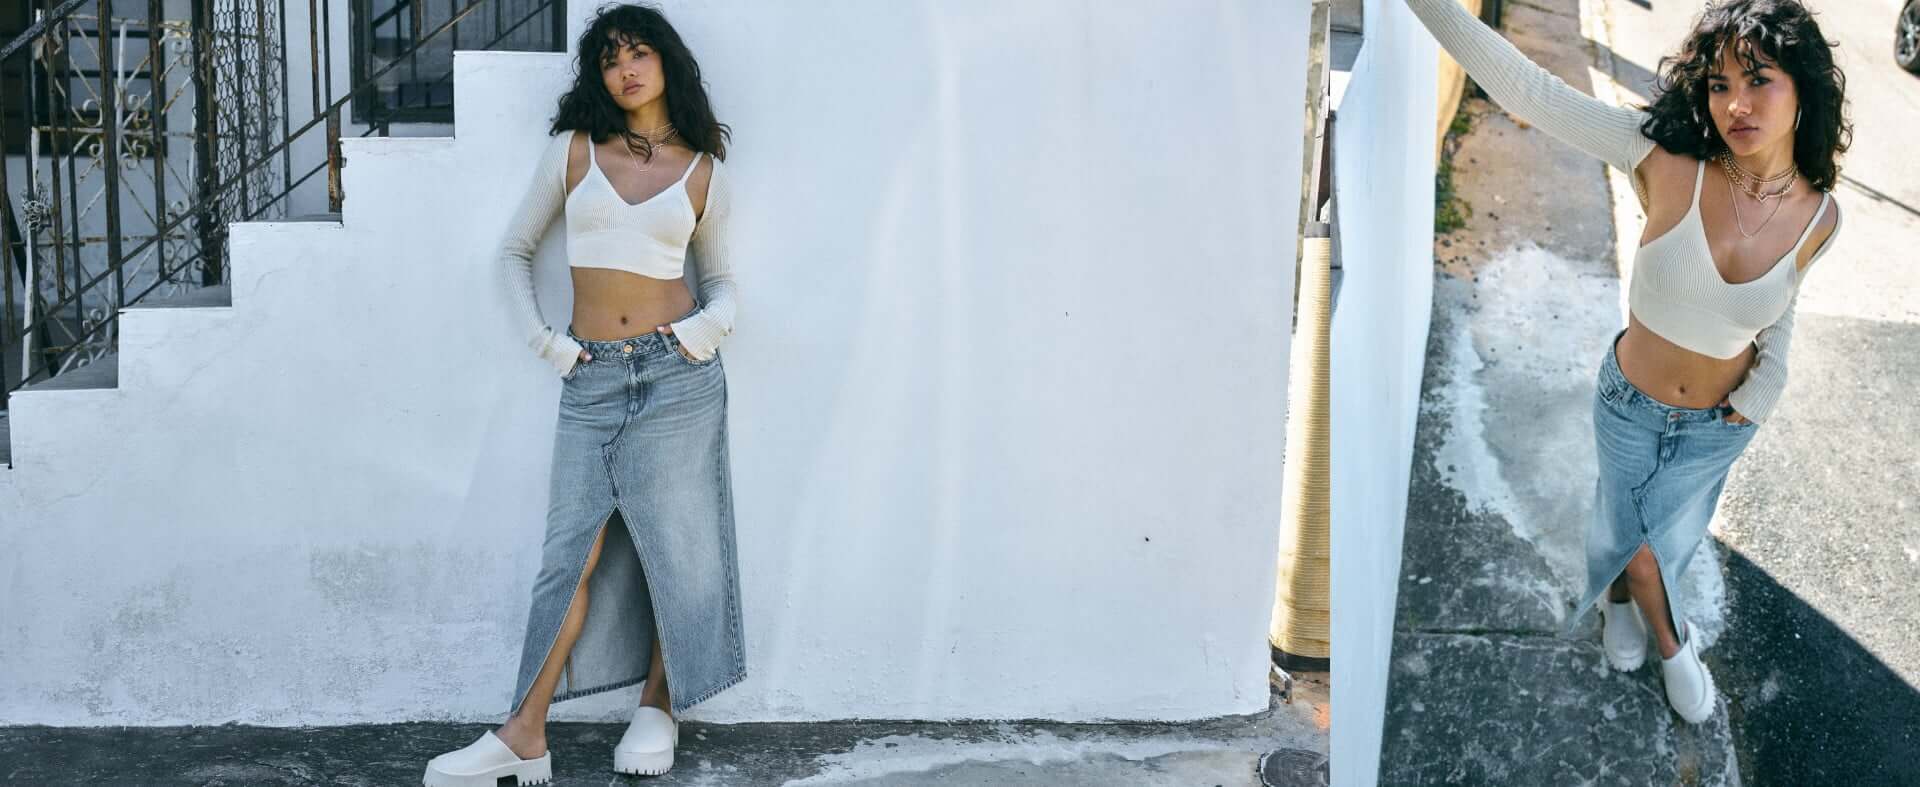 Model is wearing a crop top, a shrug, and denim skirt.